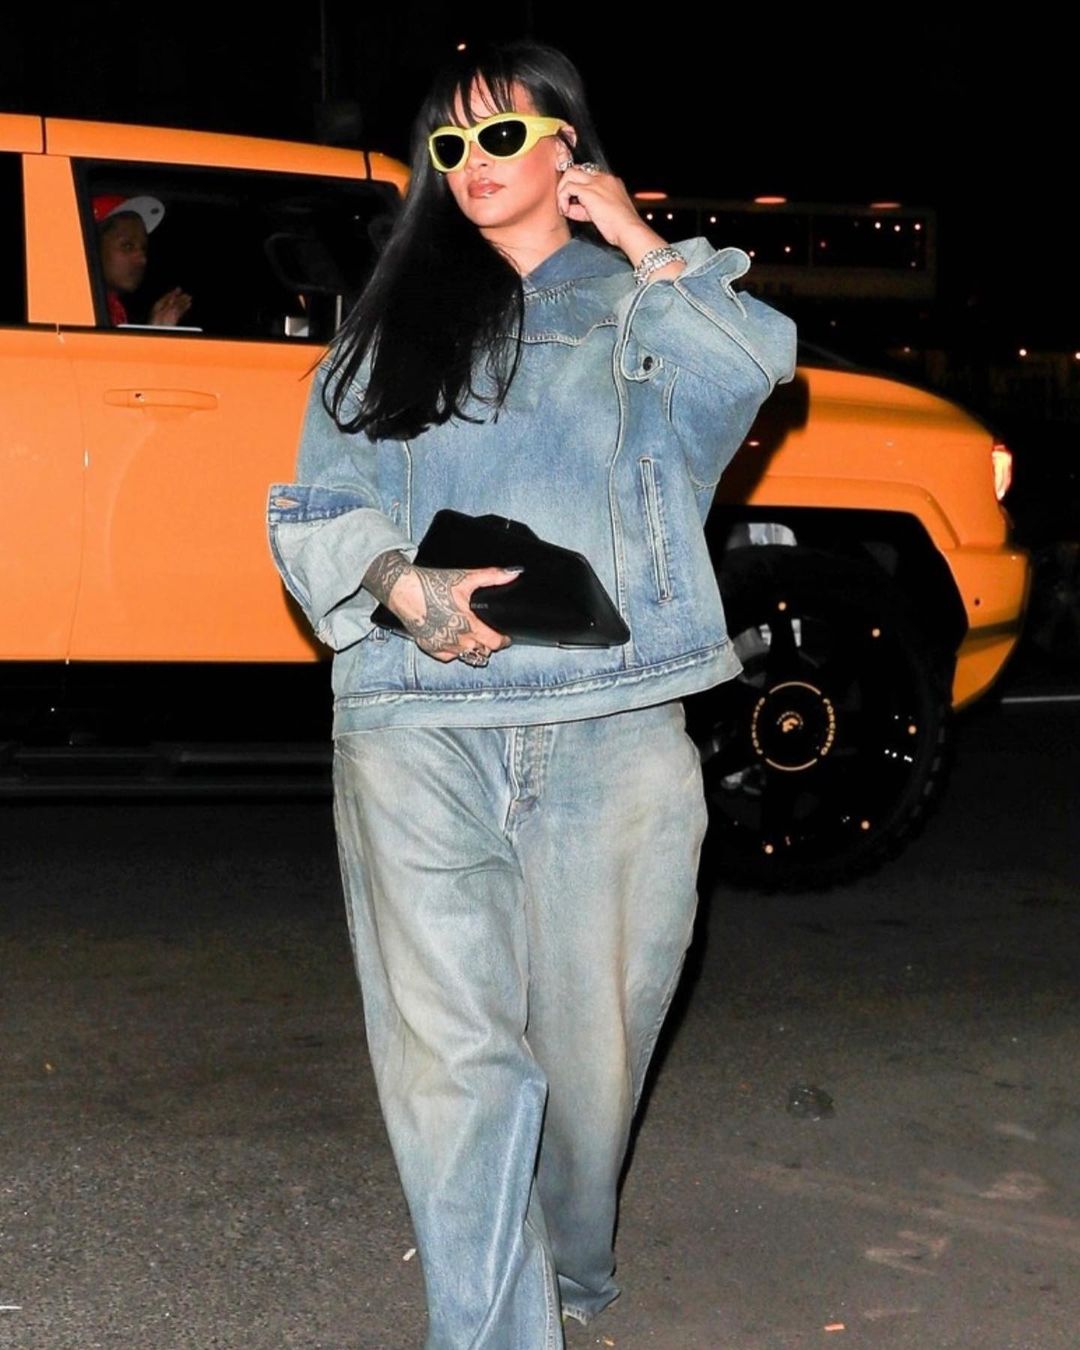 Denim On Denim: The Fall Staple Is Making Its Trendy Rounds